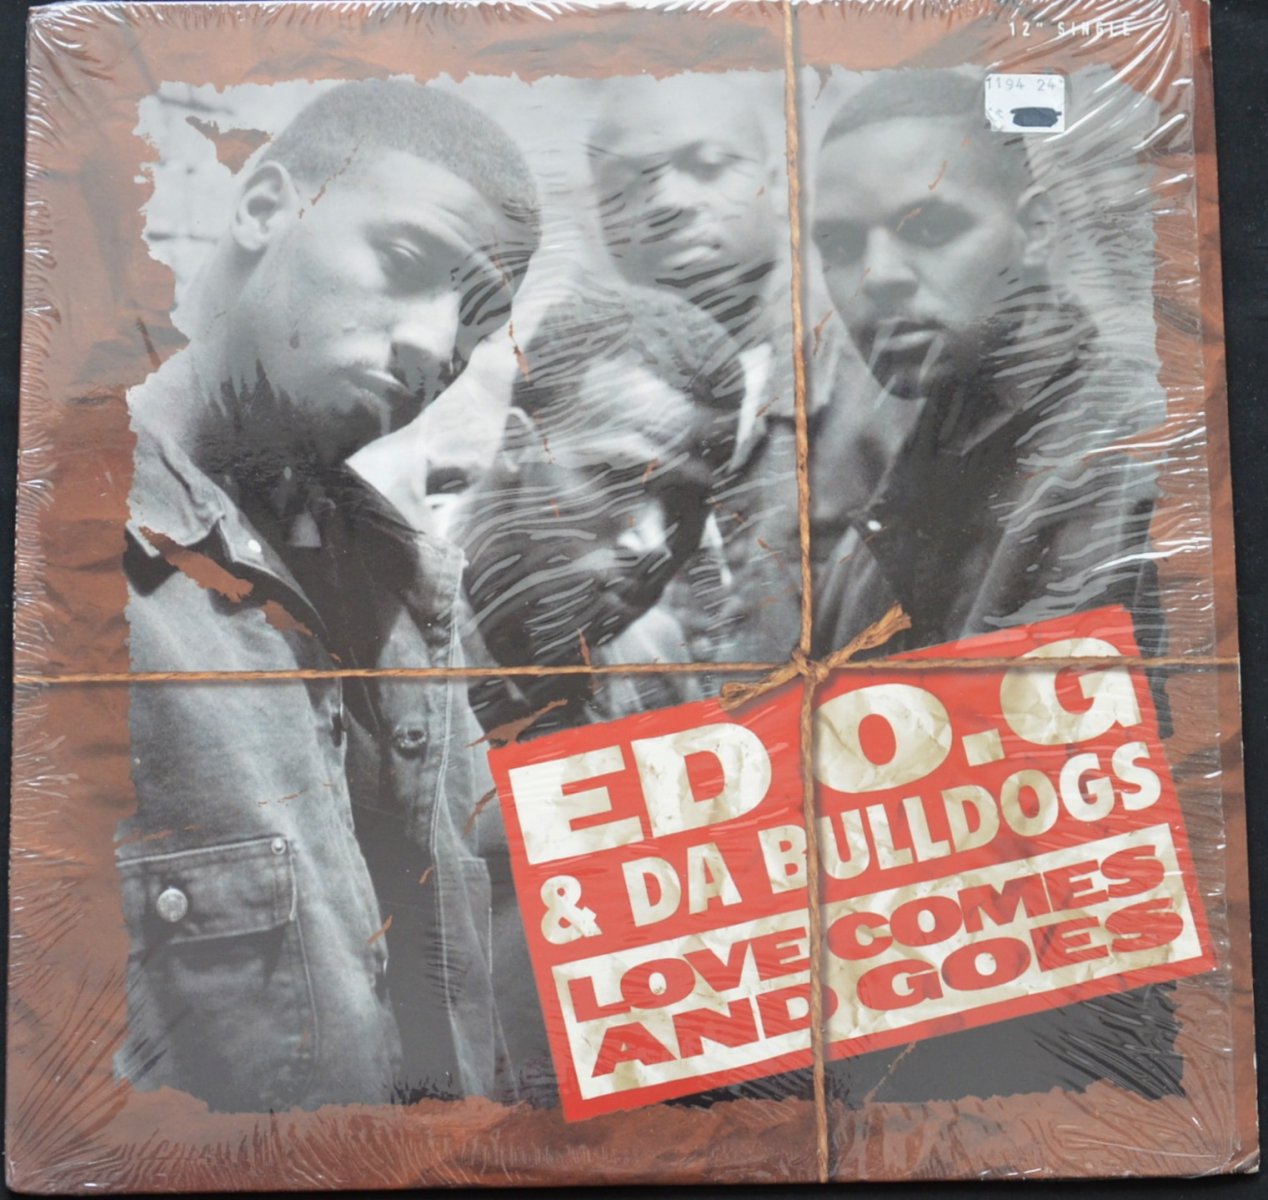 ED O.G. & DA BULLDOGS / LOVE COMES AND GOES (PROD BY DIAMOND D) / EASY COMES EASY GOES (12